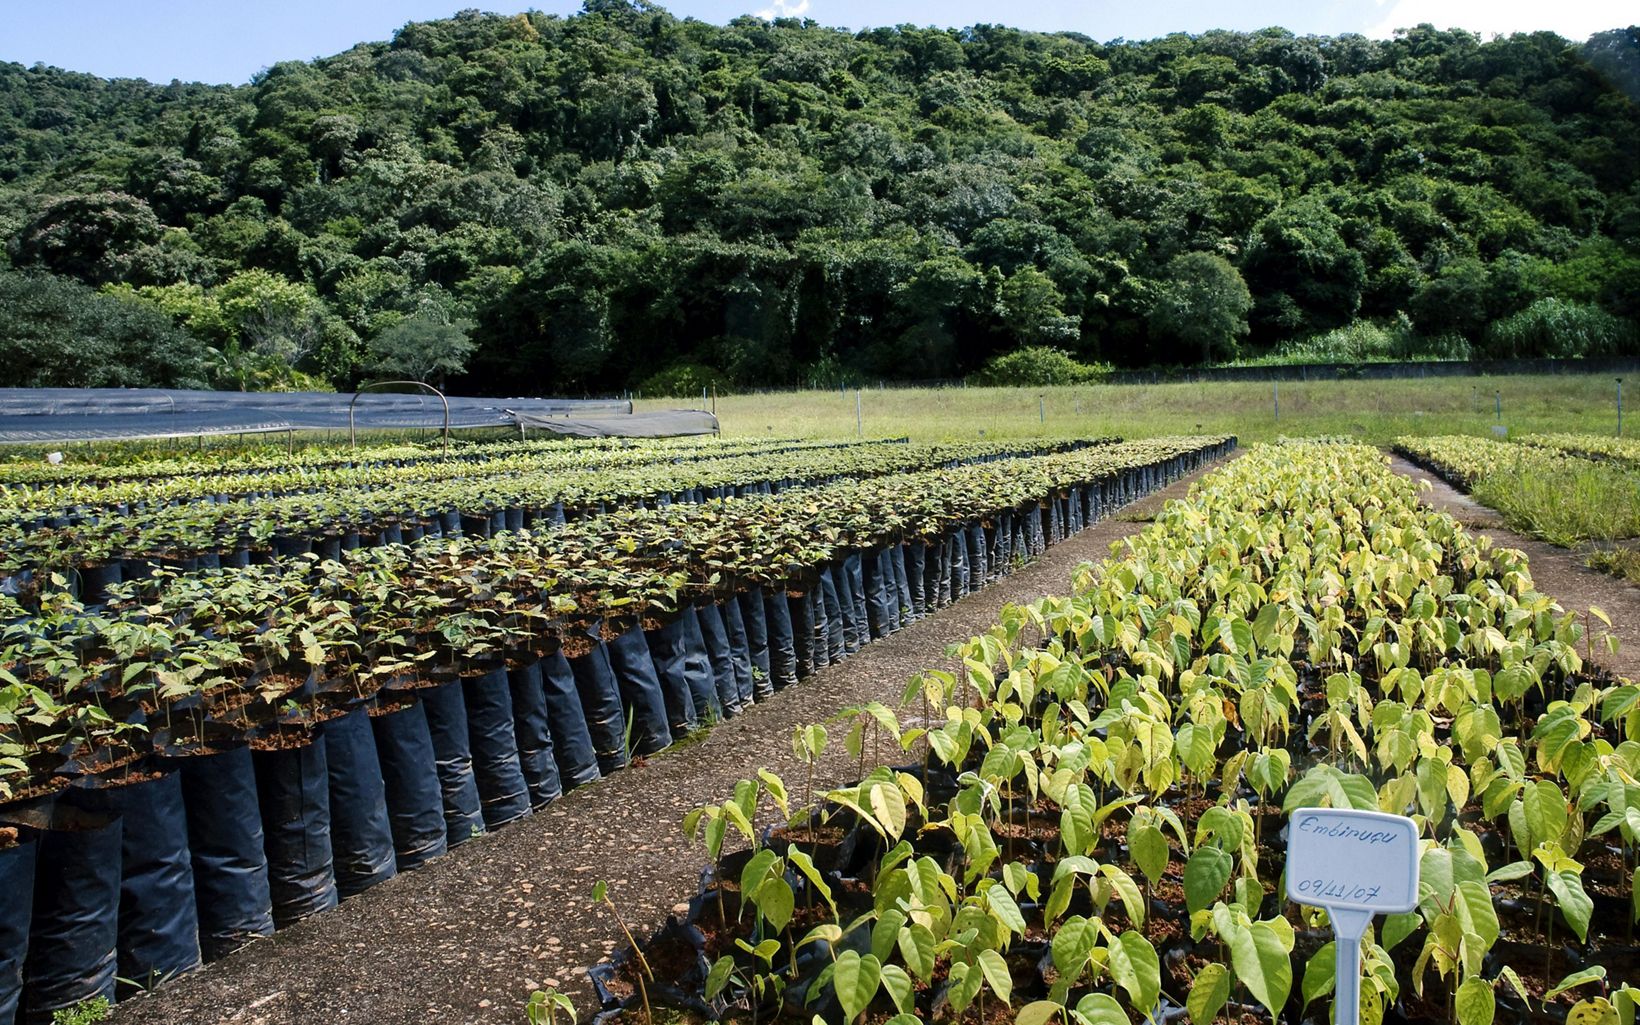 These tree seedlings will be planted in local reforestation efforts to restore degraded riparian areas in watersheds that supply water to the city of São Paulo.